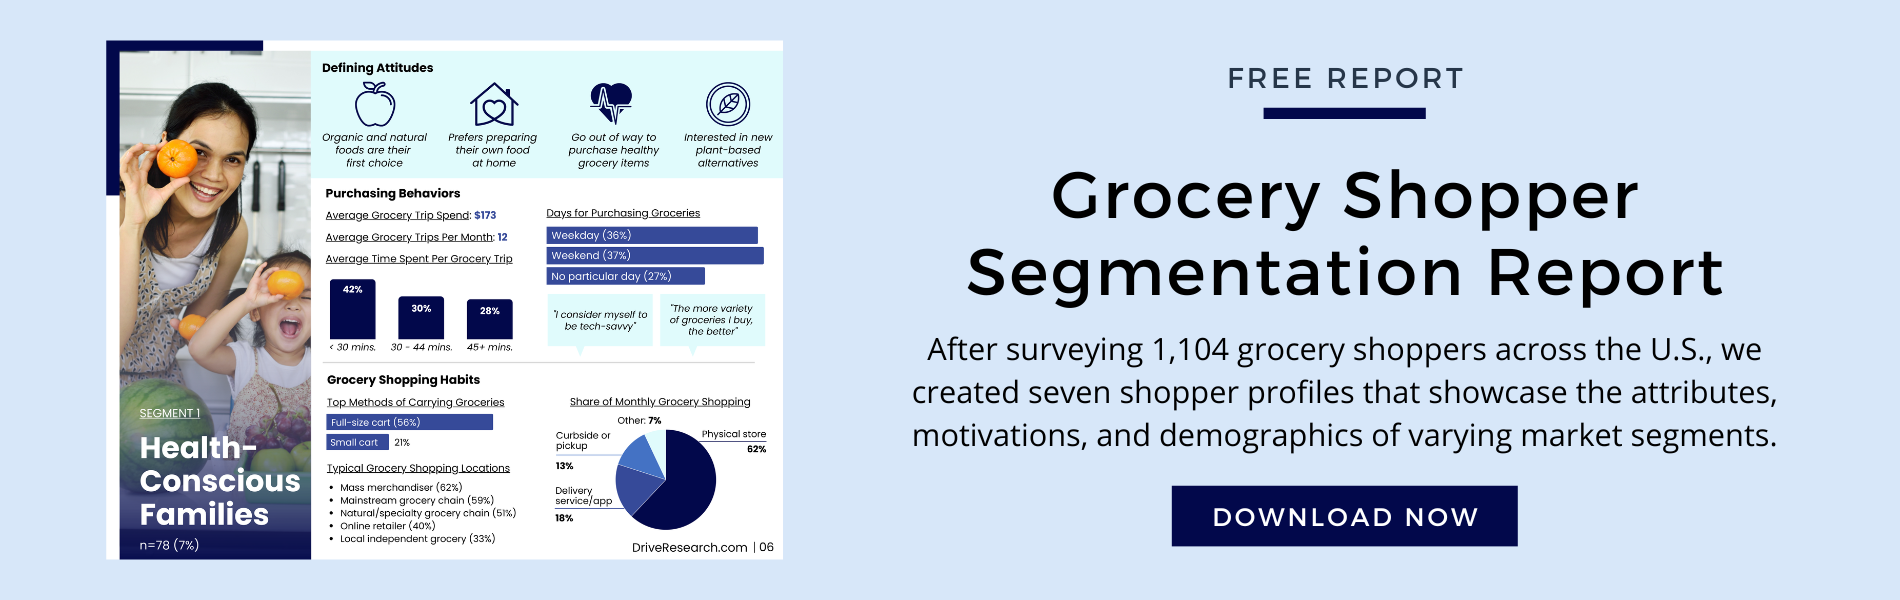 grocery shopper segmentation report call to action